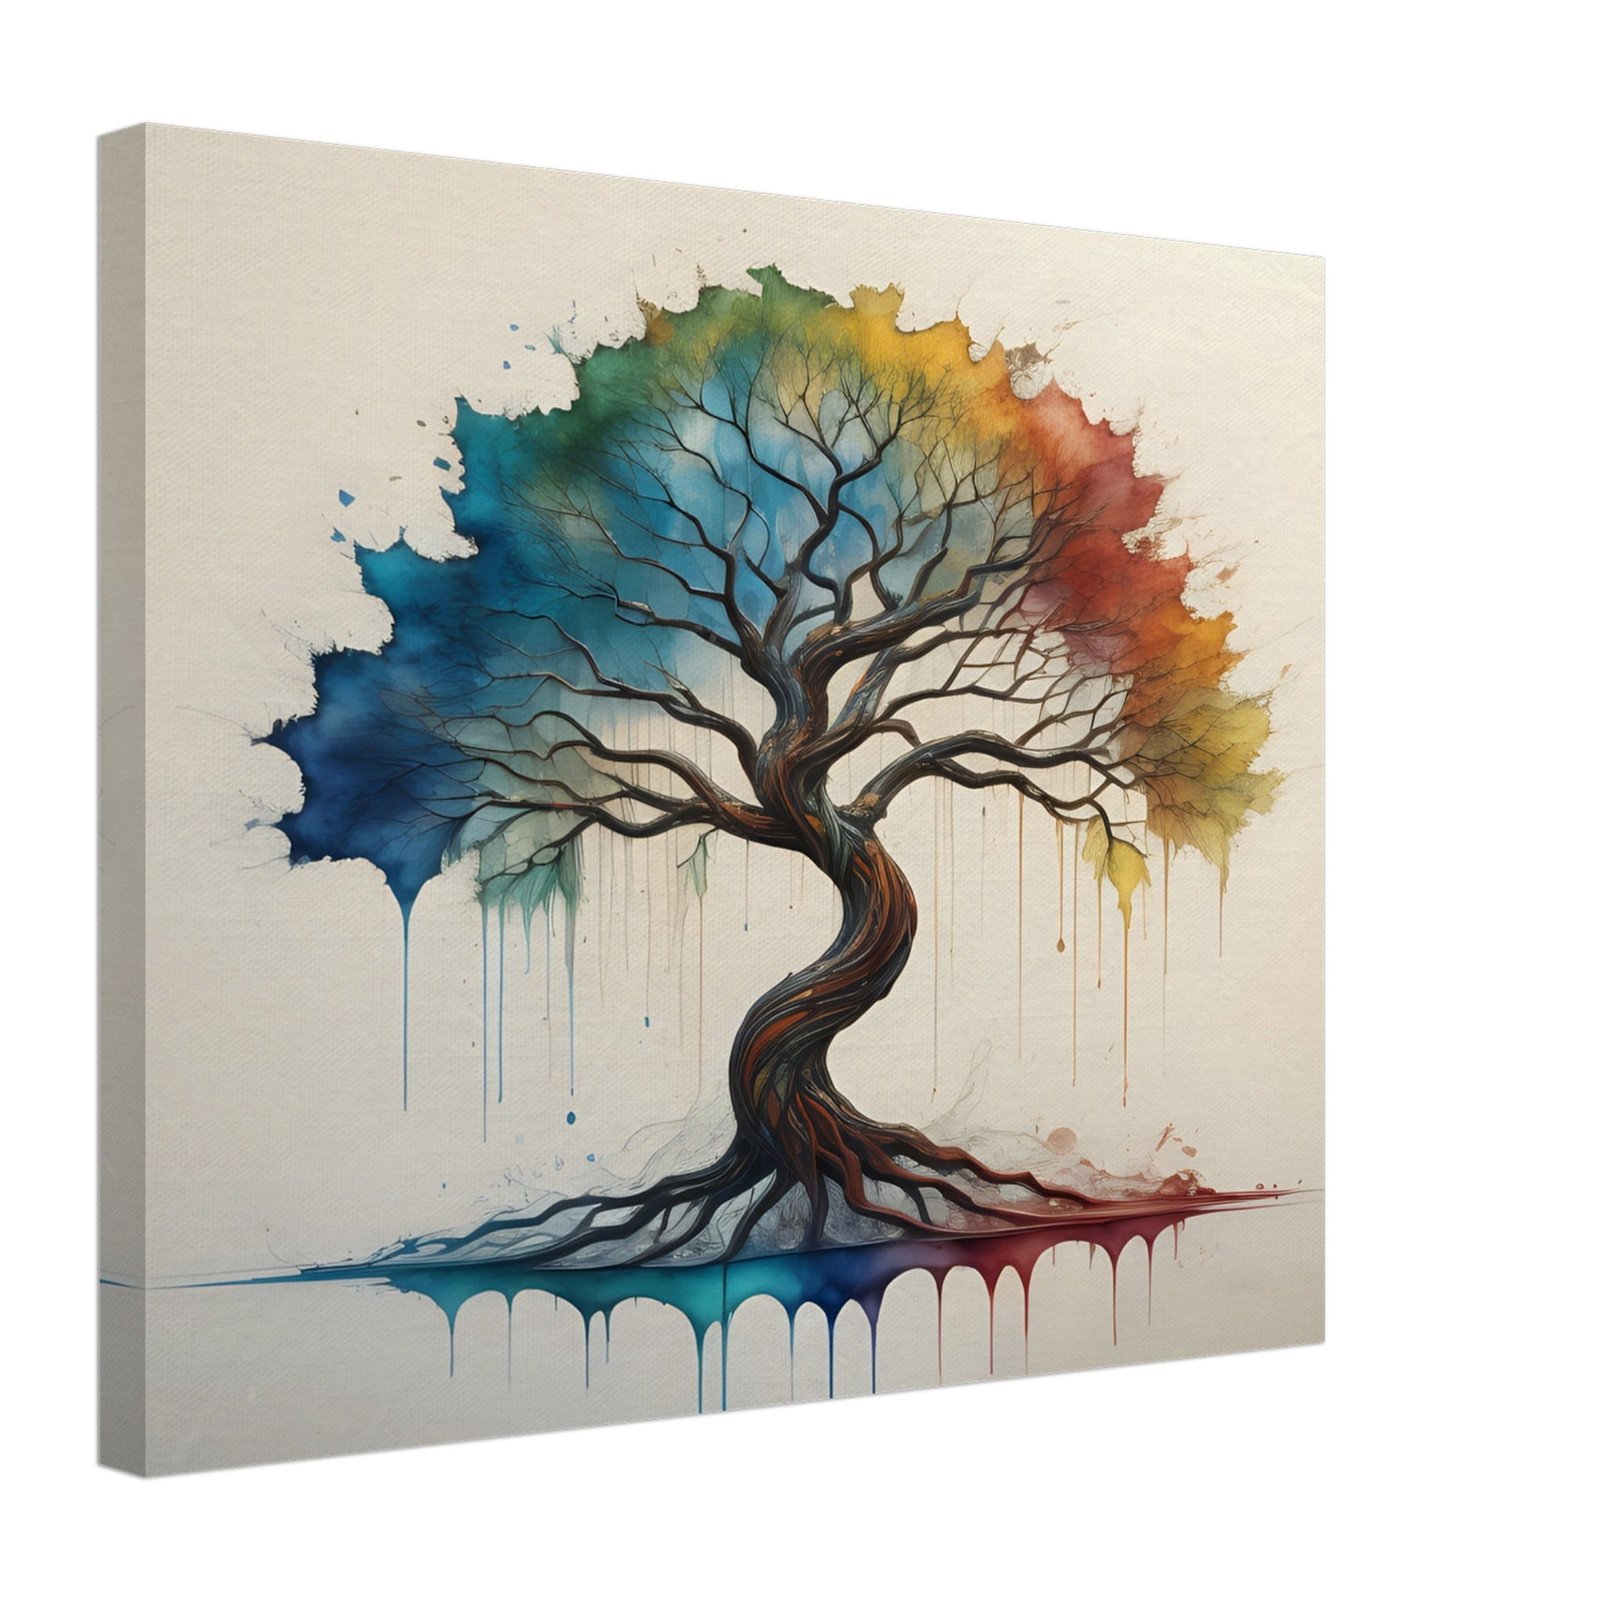 Money tree canvas art print with water colors dripping from the leaves canvas art print